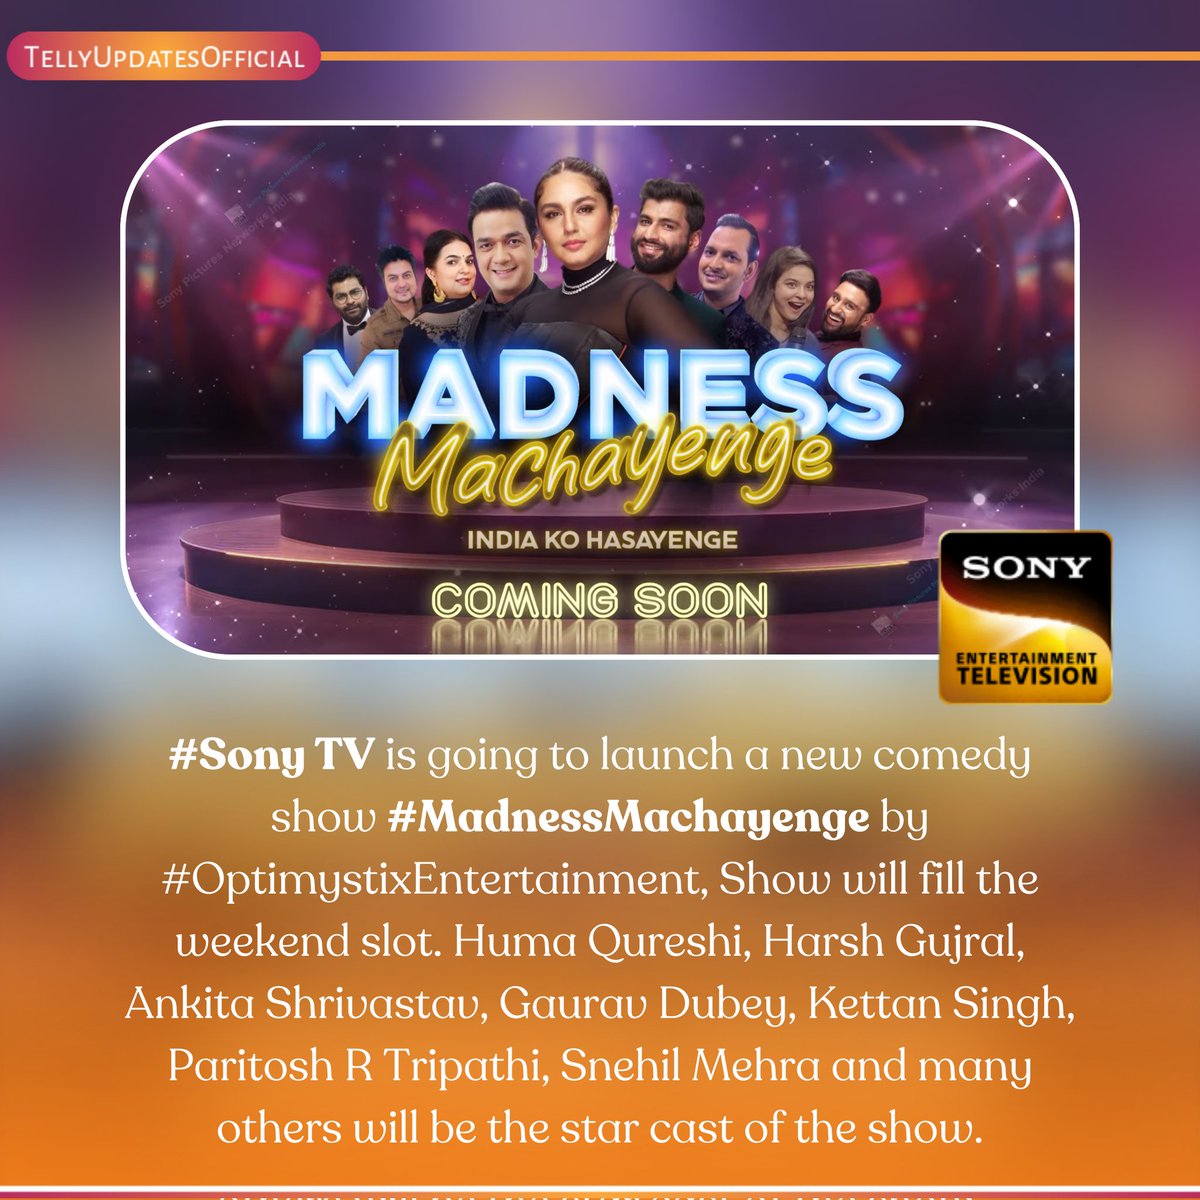 #SuperExclusive BREAKING NEWS @SonyTV will launch a new comedy show #MadnessMachayenge by #OptimystixEntertainment. #HumaQureshi, #HarshGujral, #AnkitaShrivastav, #GauravDubey, #KettanSingh, #ParitoshRTripathi, #SnehilMehra and many others will be the star cast of the show.